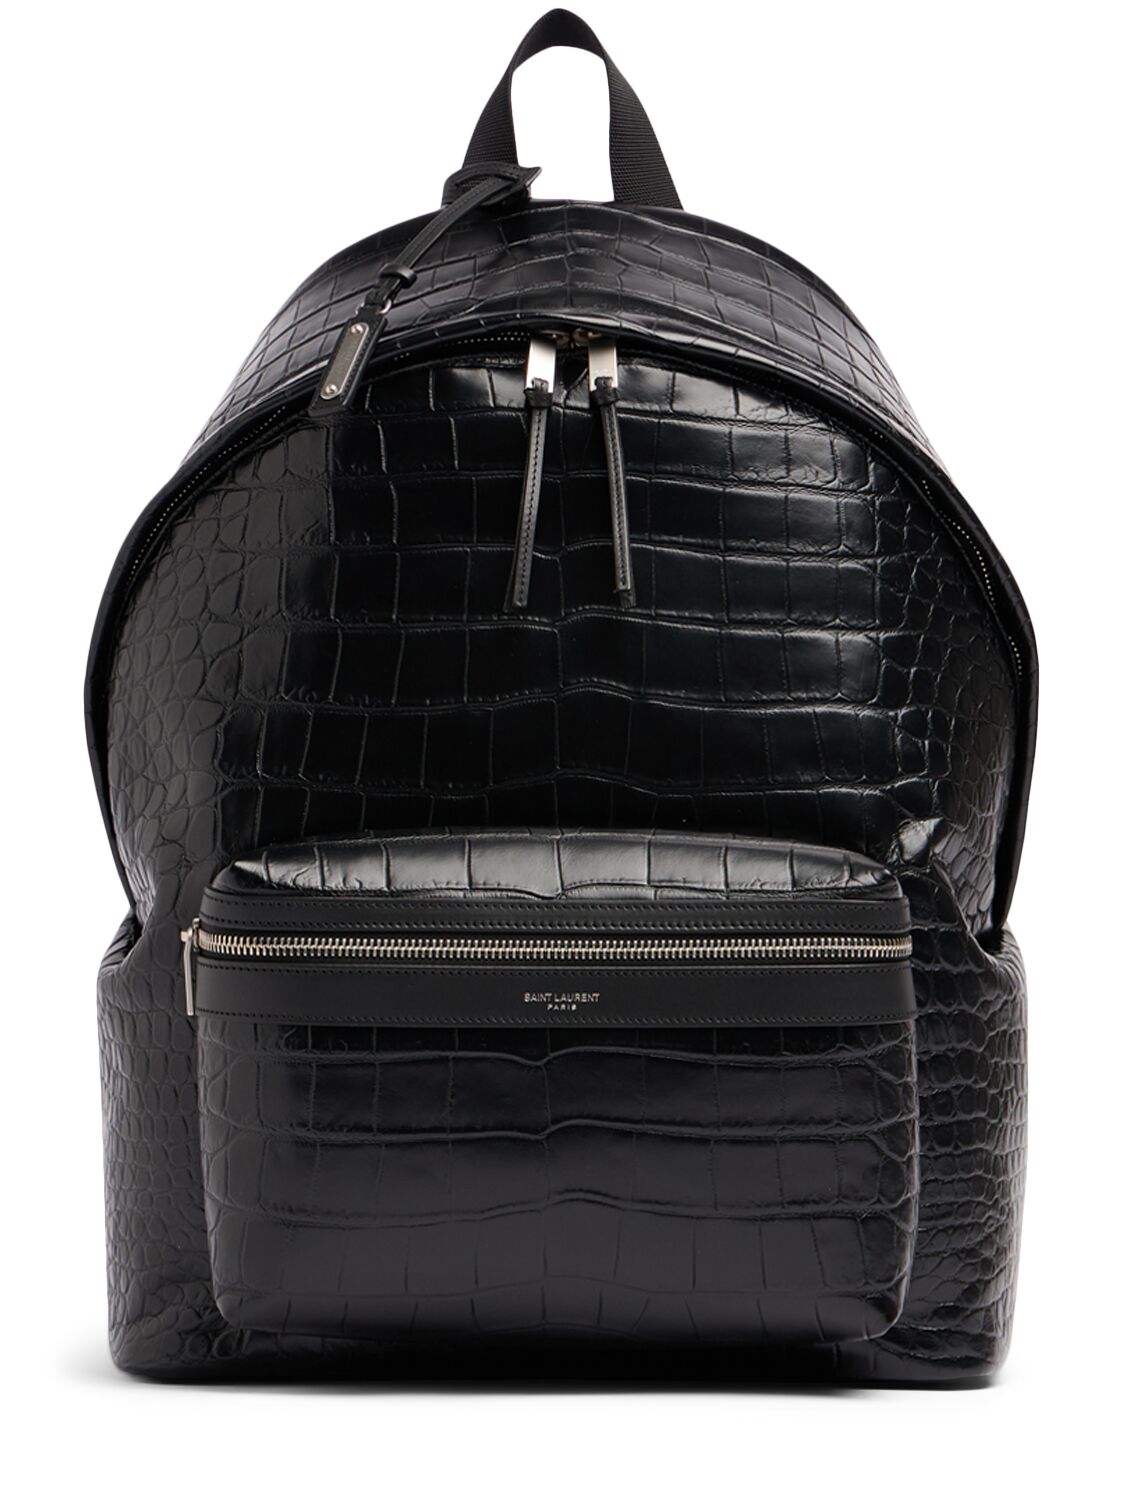 Croc Embossed Leather Backpack